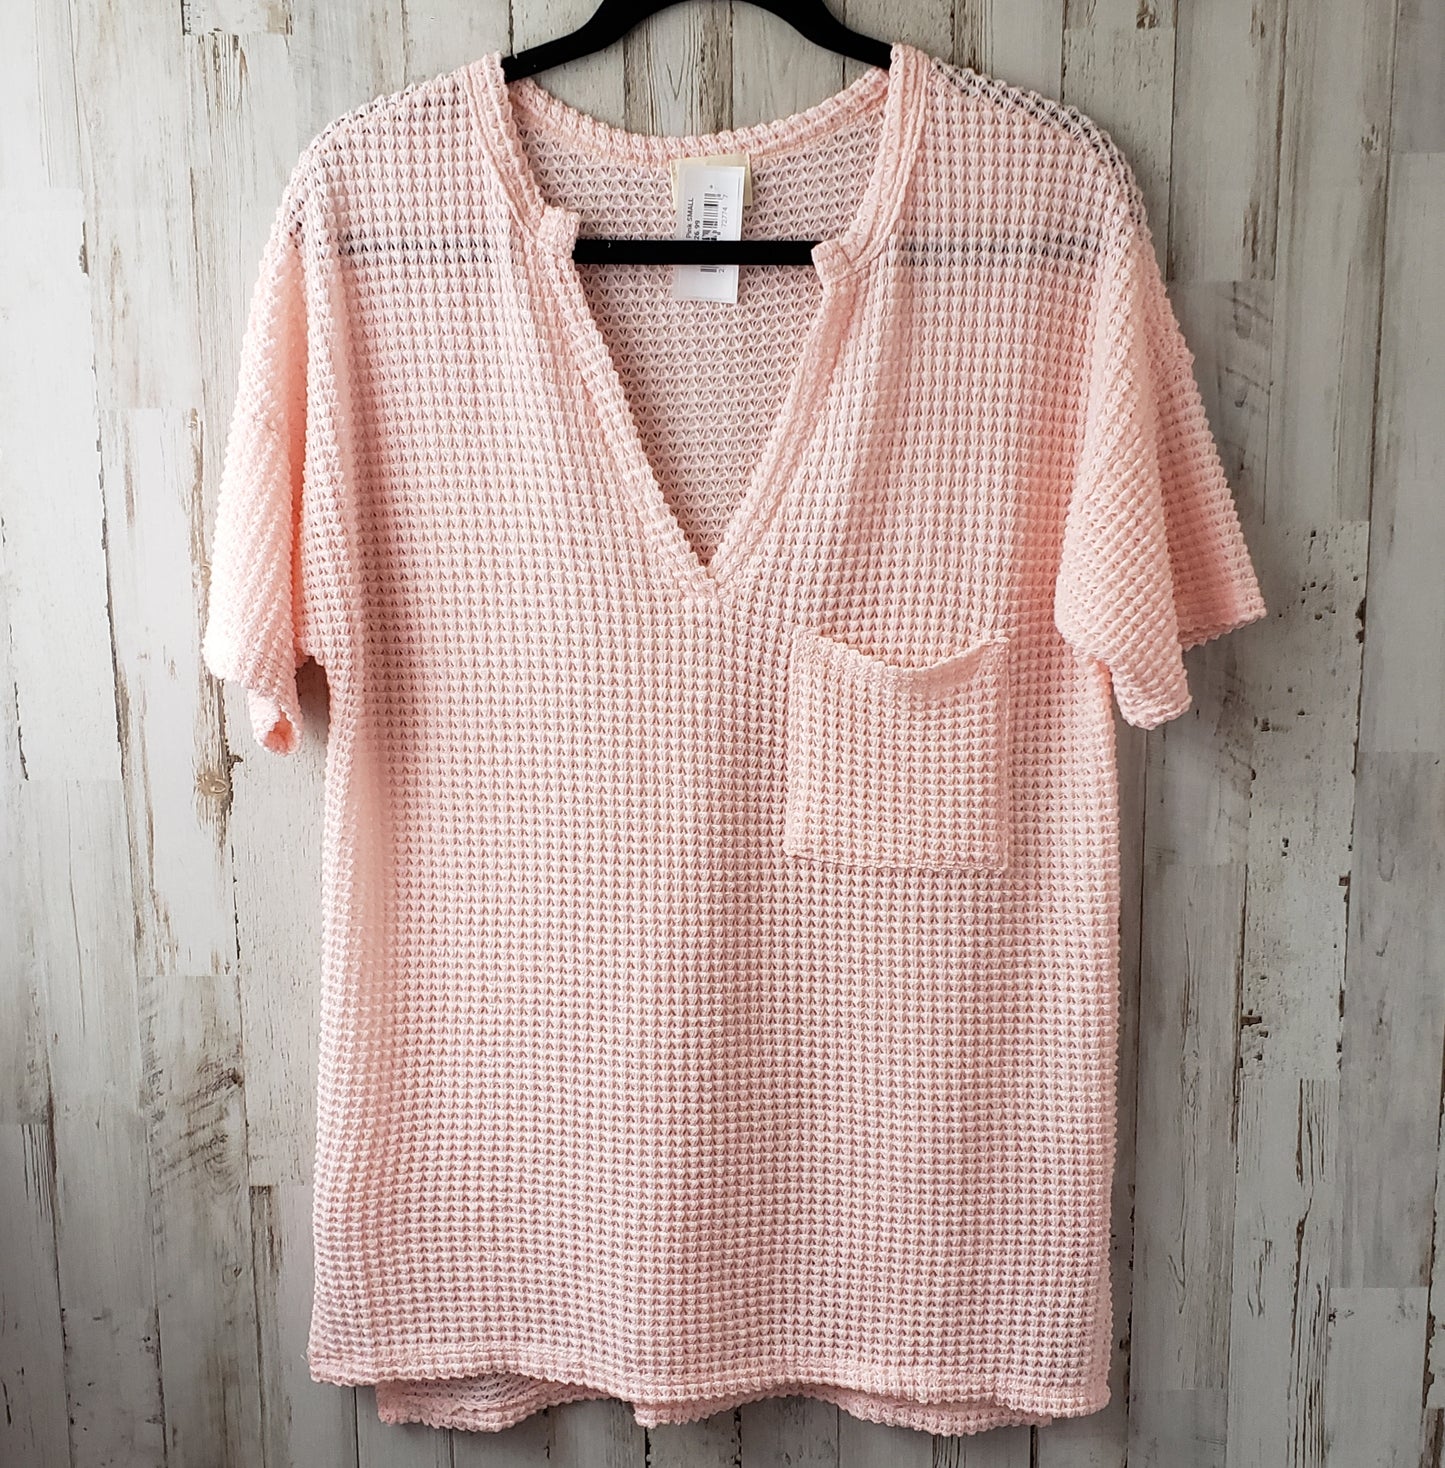 Oh Sew Pink top